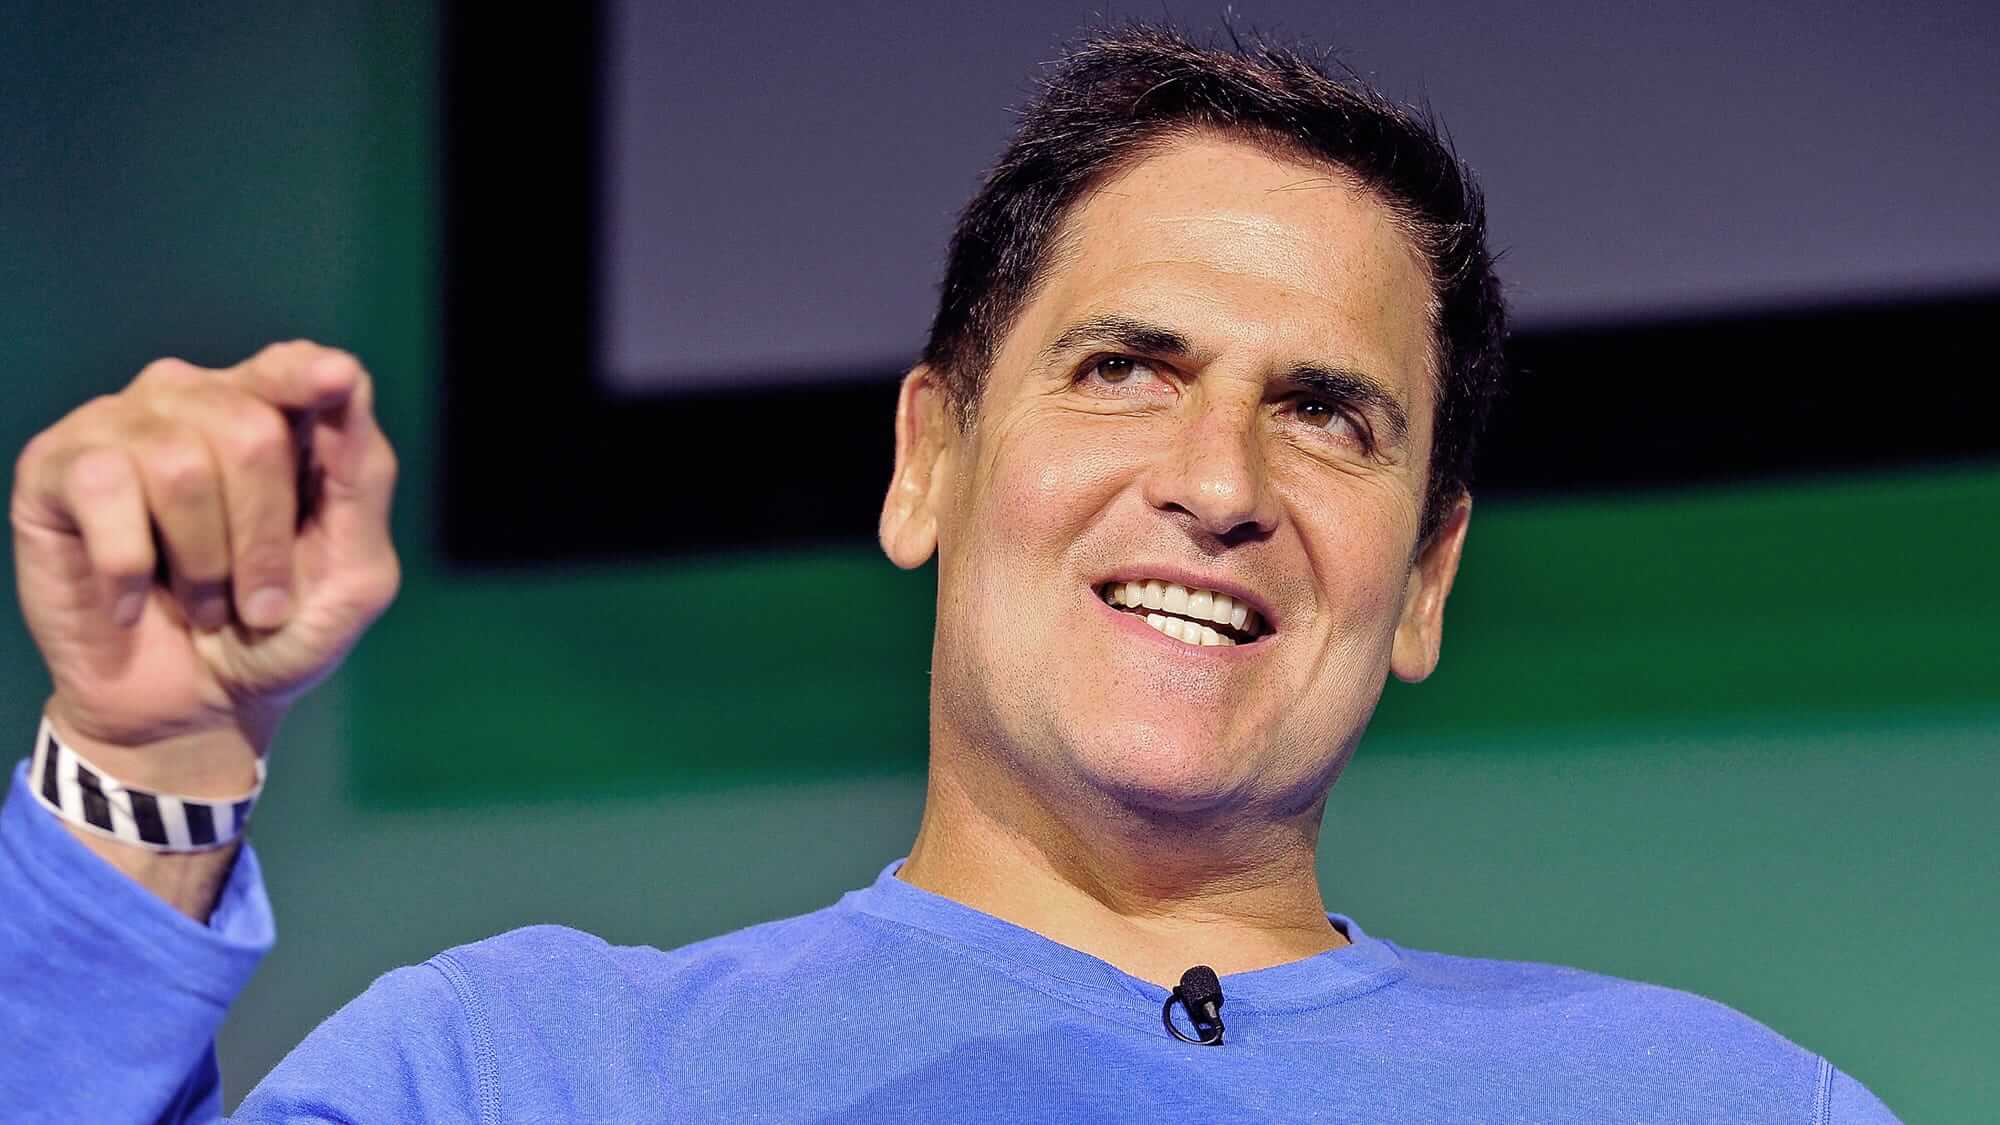 Mark Cuban to reform the healthcare industry in America